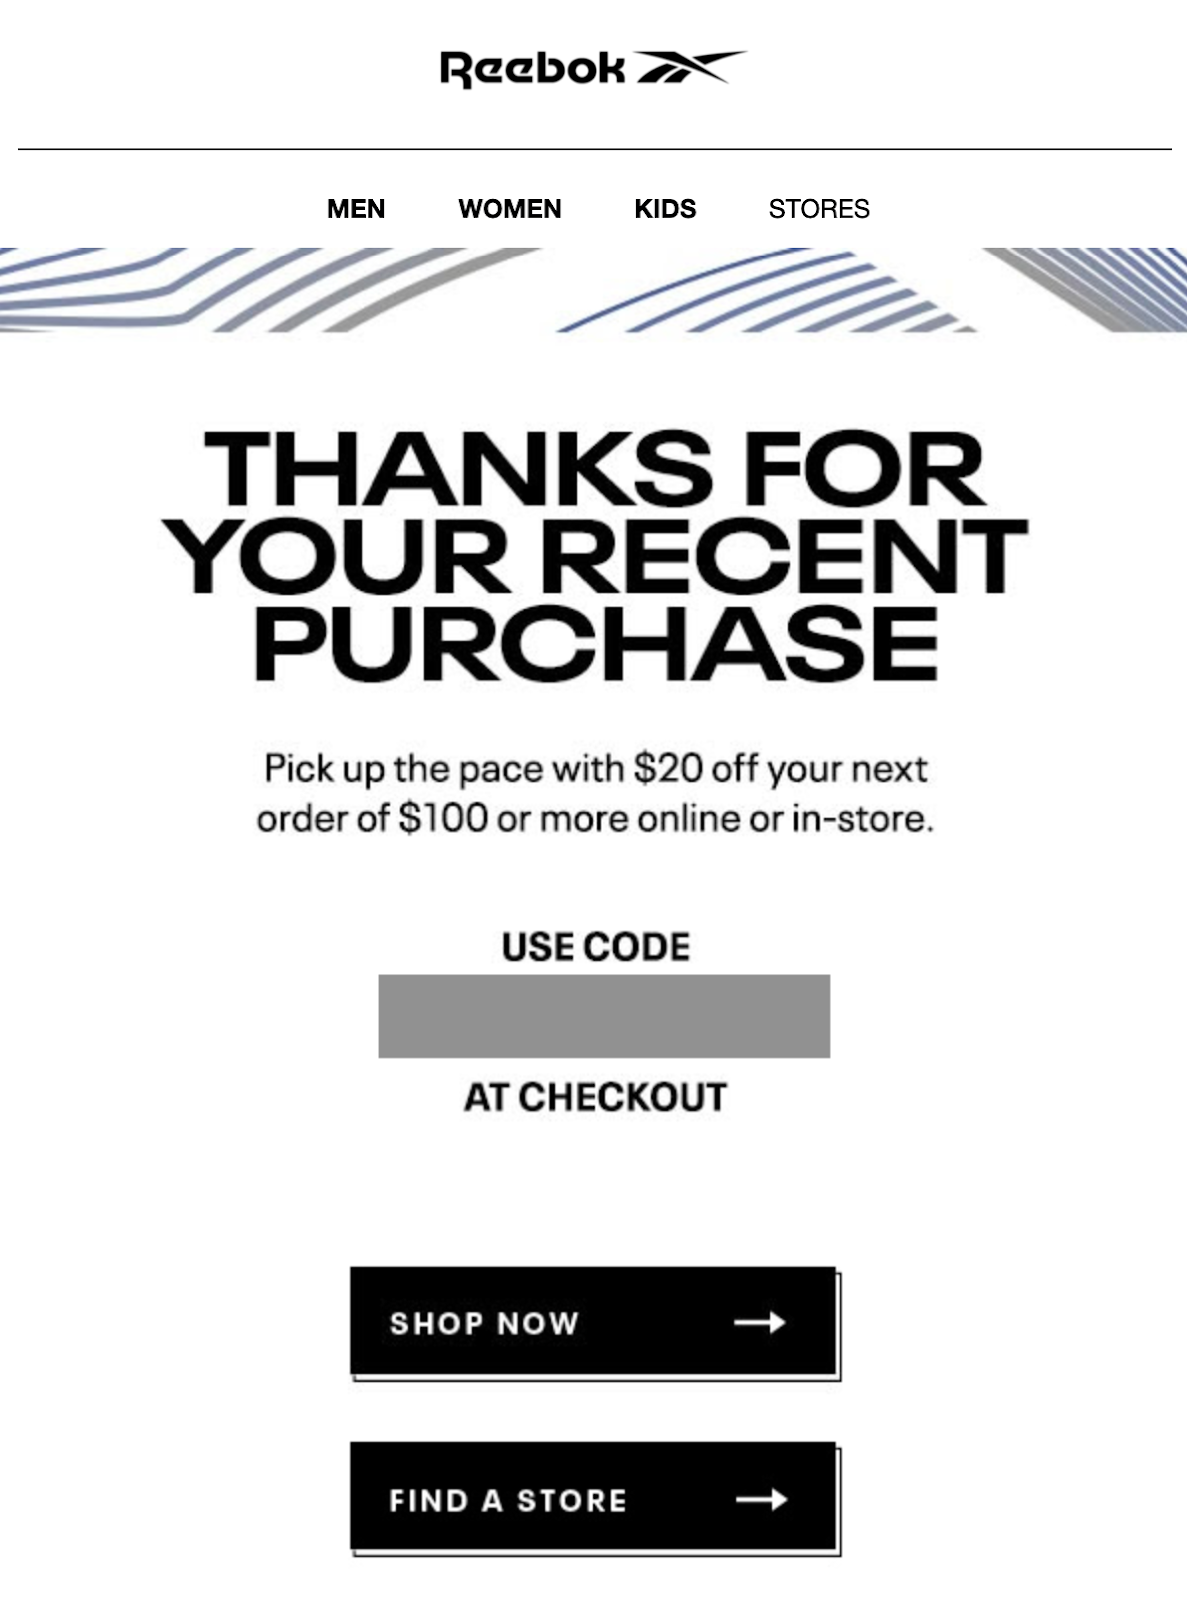 "7 Growth Strategies for Ecommerce Marketers" screenshot example email for loyalty from Reebok with text reading "thanks for your recent purchase"